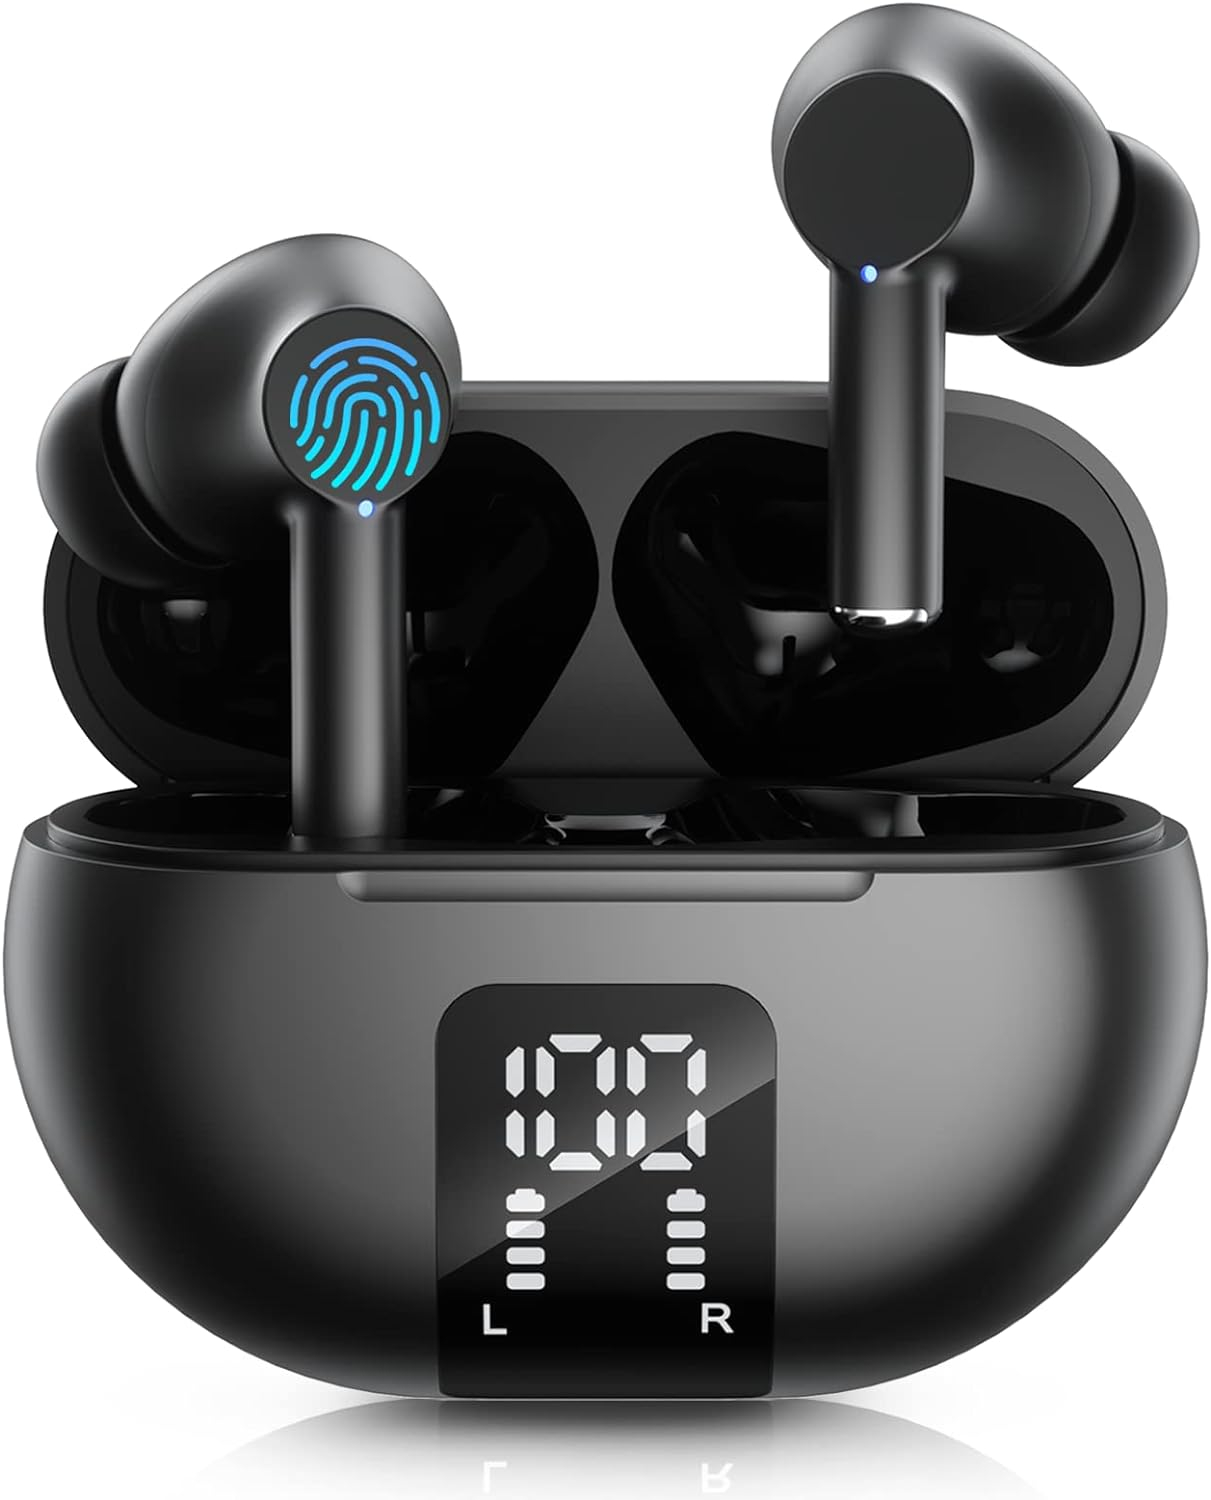 Carego Wireless Ear Buds Bluetooth Earbuds,60H Playback LED Display Bluetooth 5.3 Headphone with Mic,Noise Cancellation Stereo Sound,Waterproof Earphones for iPhone/Samsung/Android Gifts for Men/Women